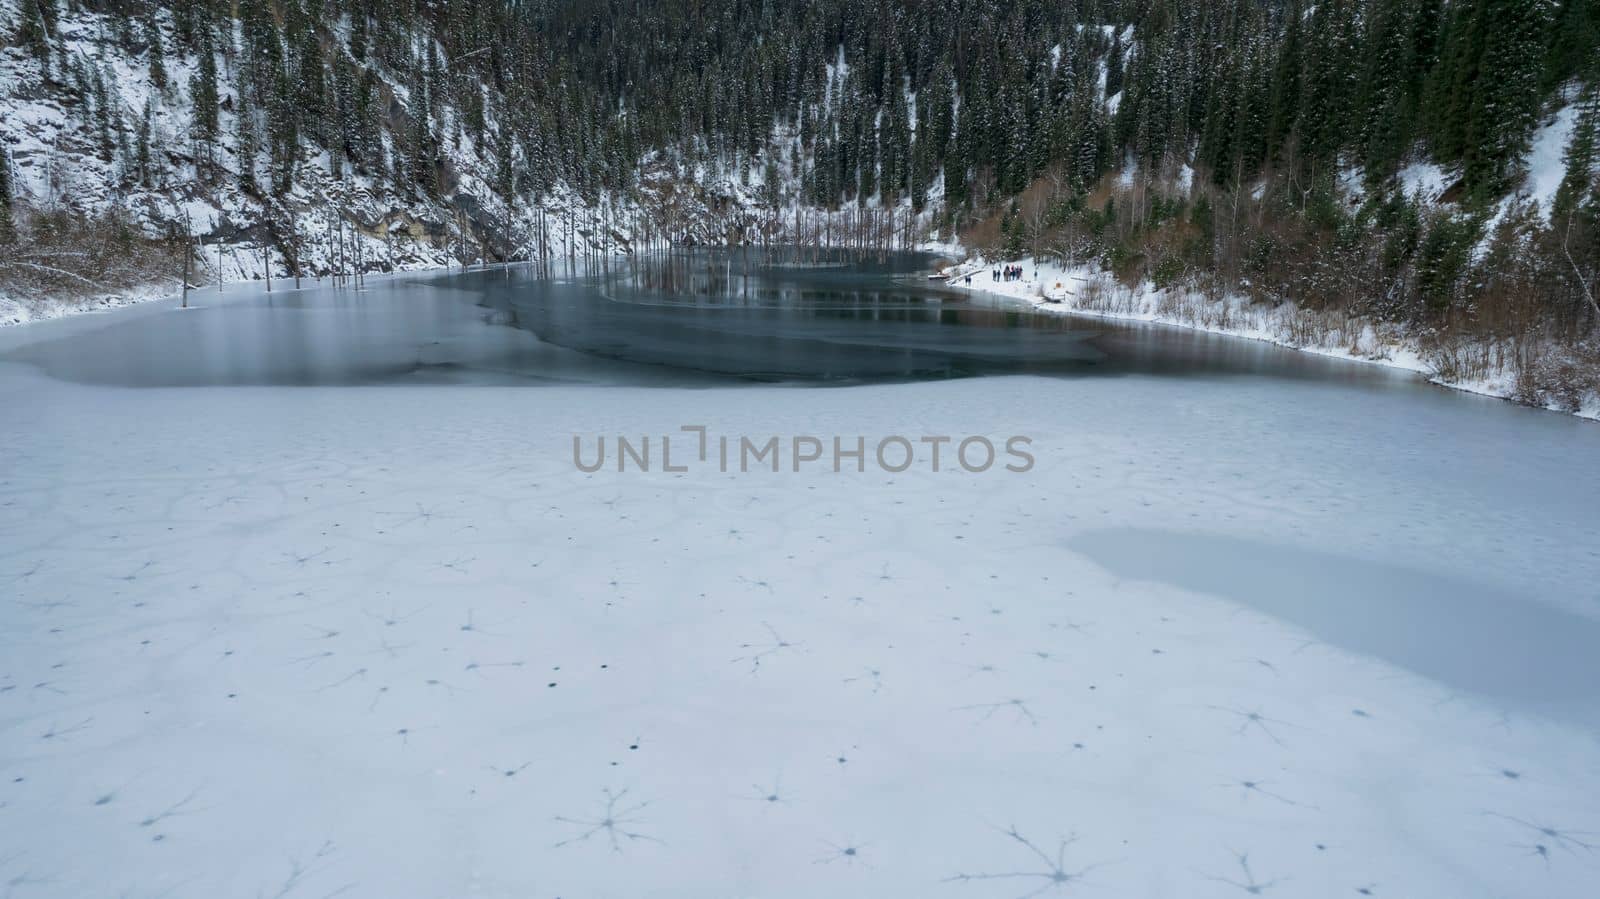 Unusual ice patterns on Kaindy Mountain Lake by Passcal